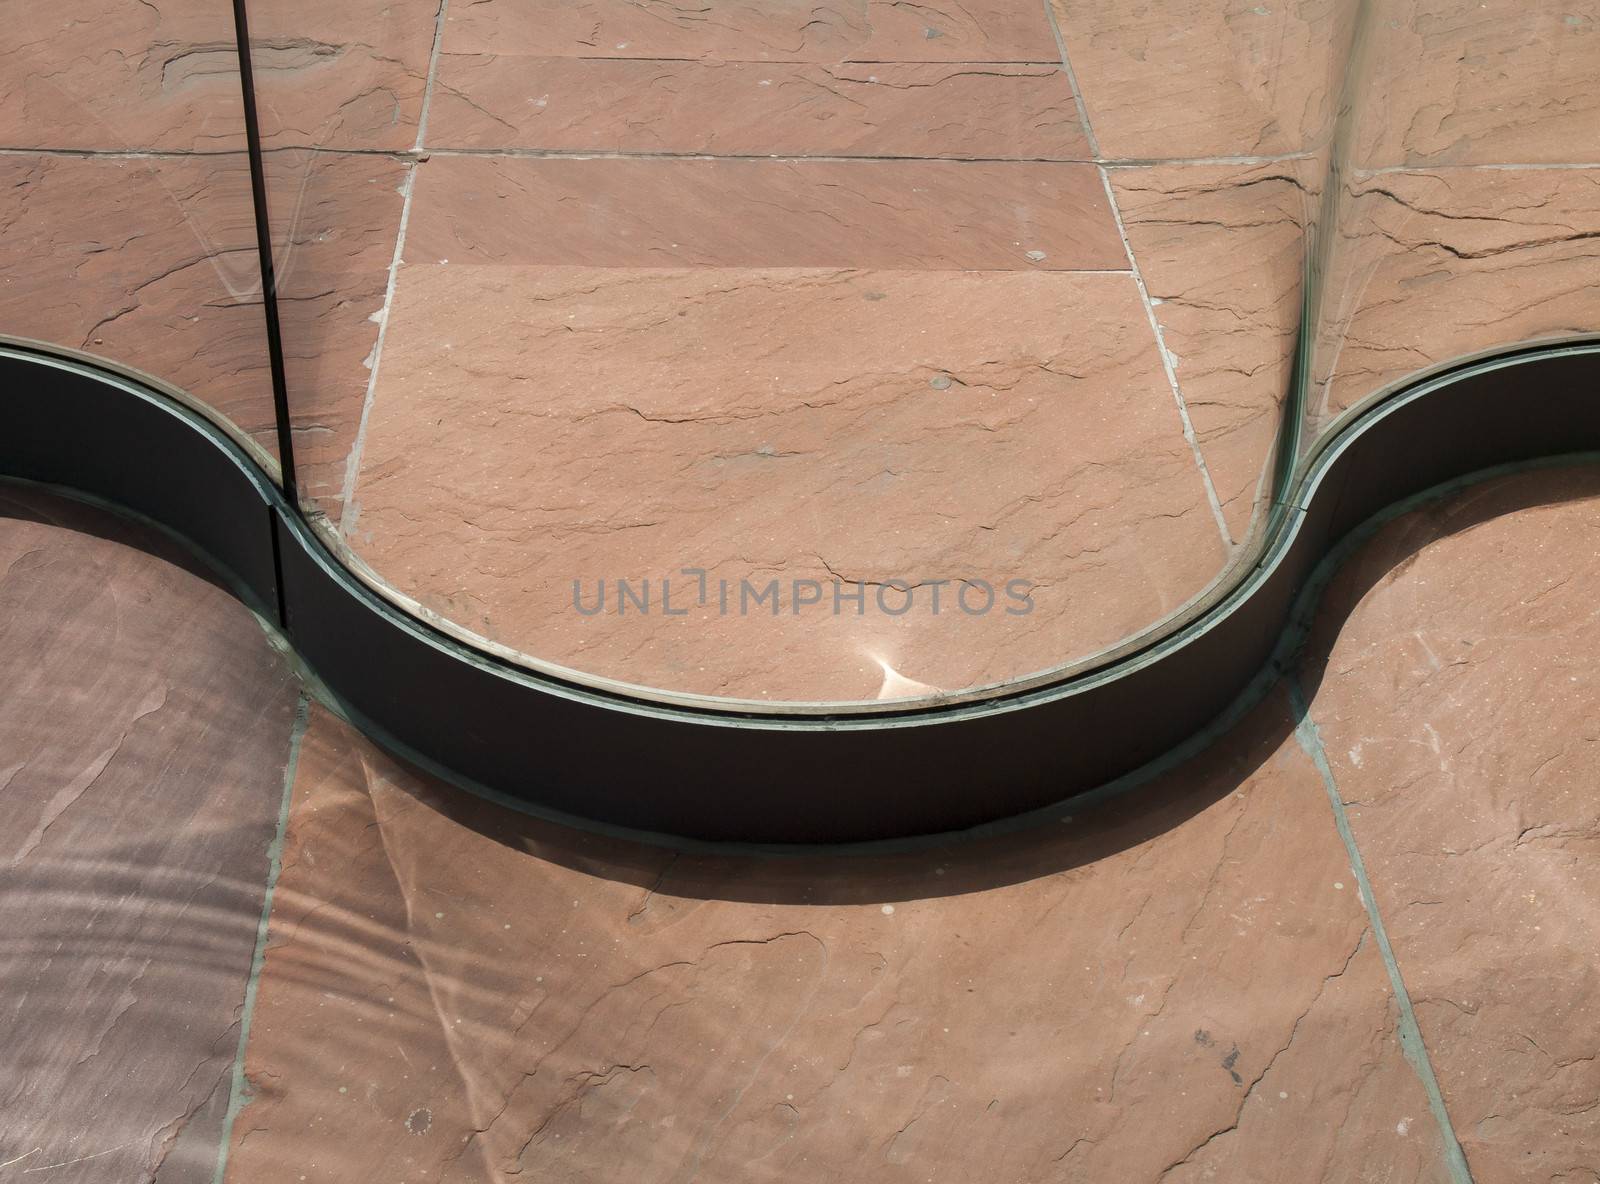 stone floor with glass wall as backgroundstone floor with glass wall as background